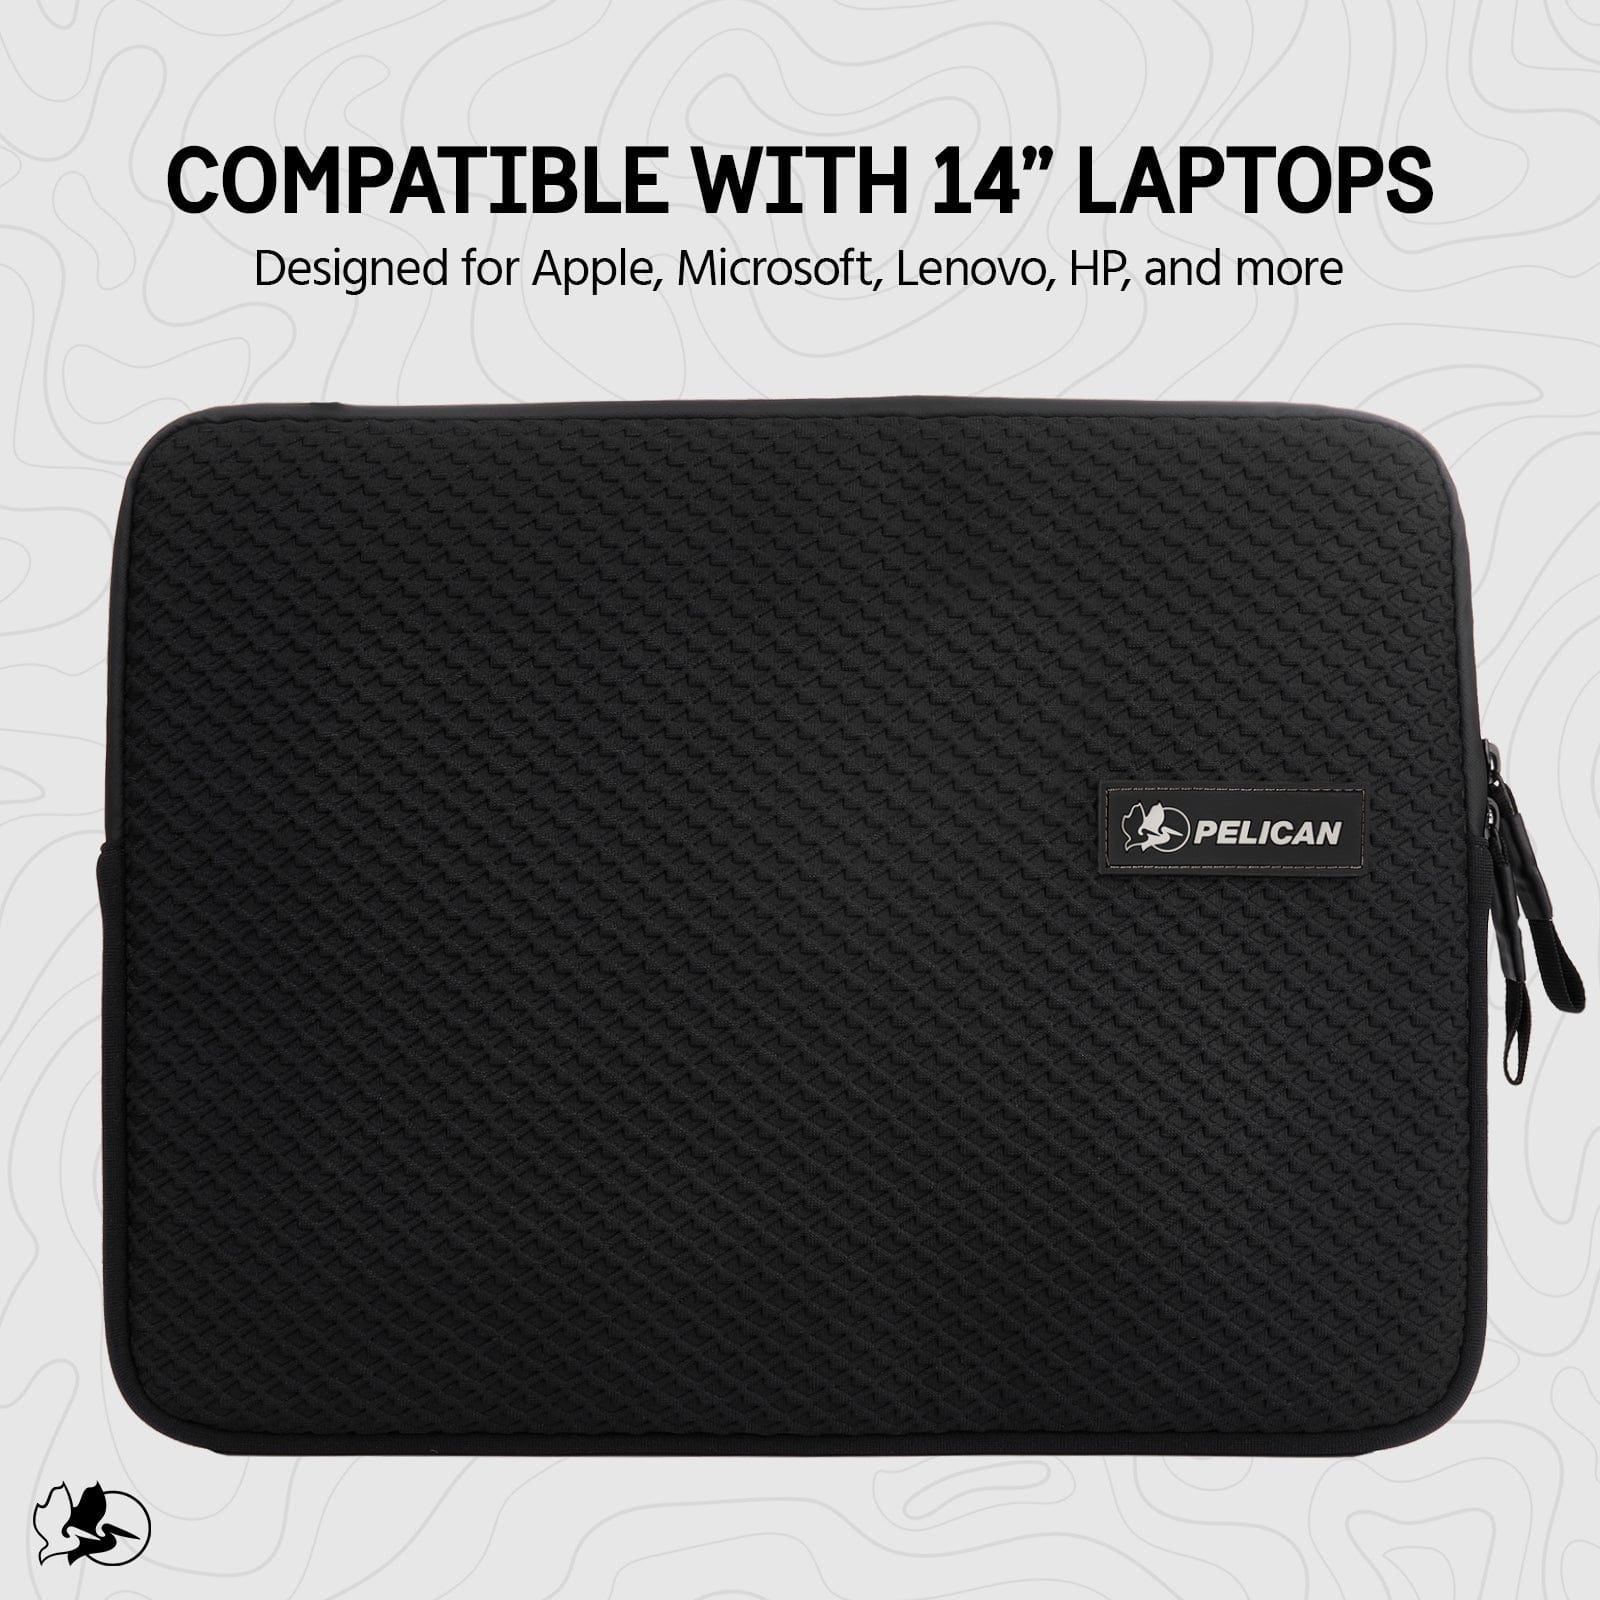 COMPATIBLE WITH 14" LAPTOPS. DESIGN FOR APPLE, MICROSOFT, LENOVO, HP AND MORE